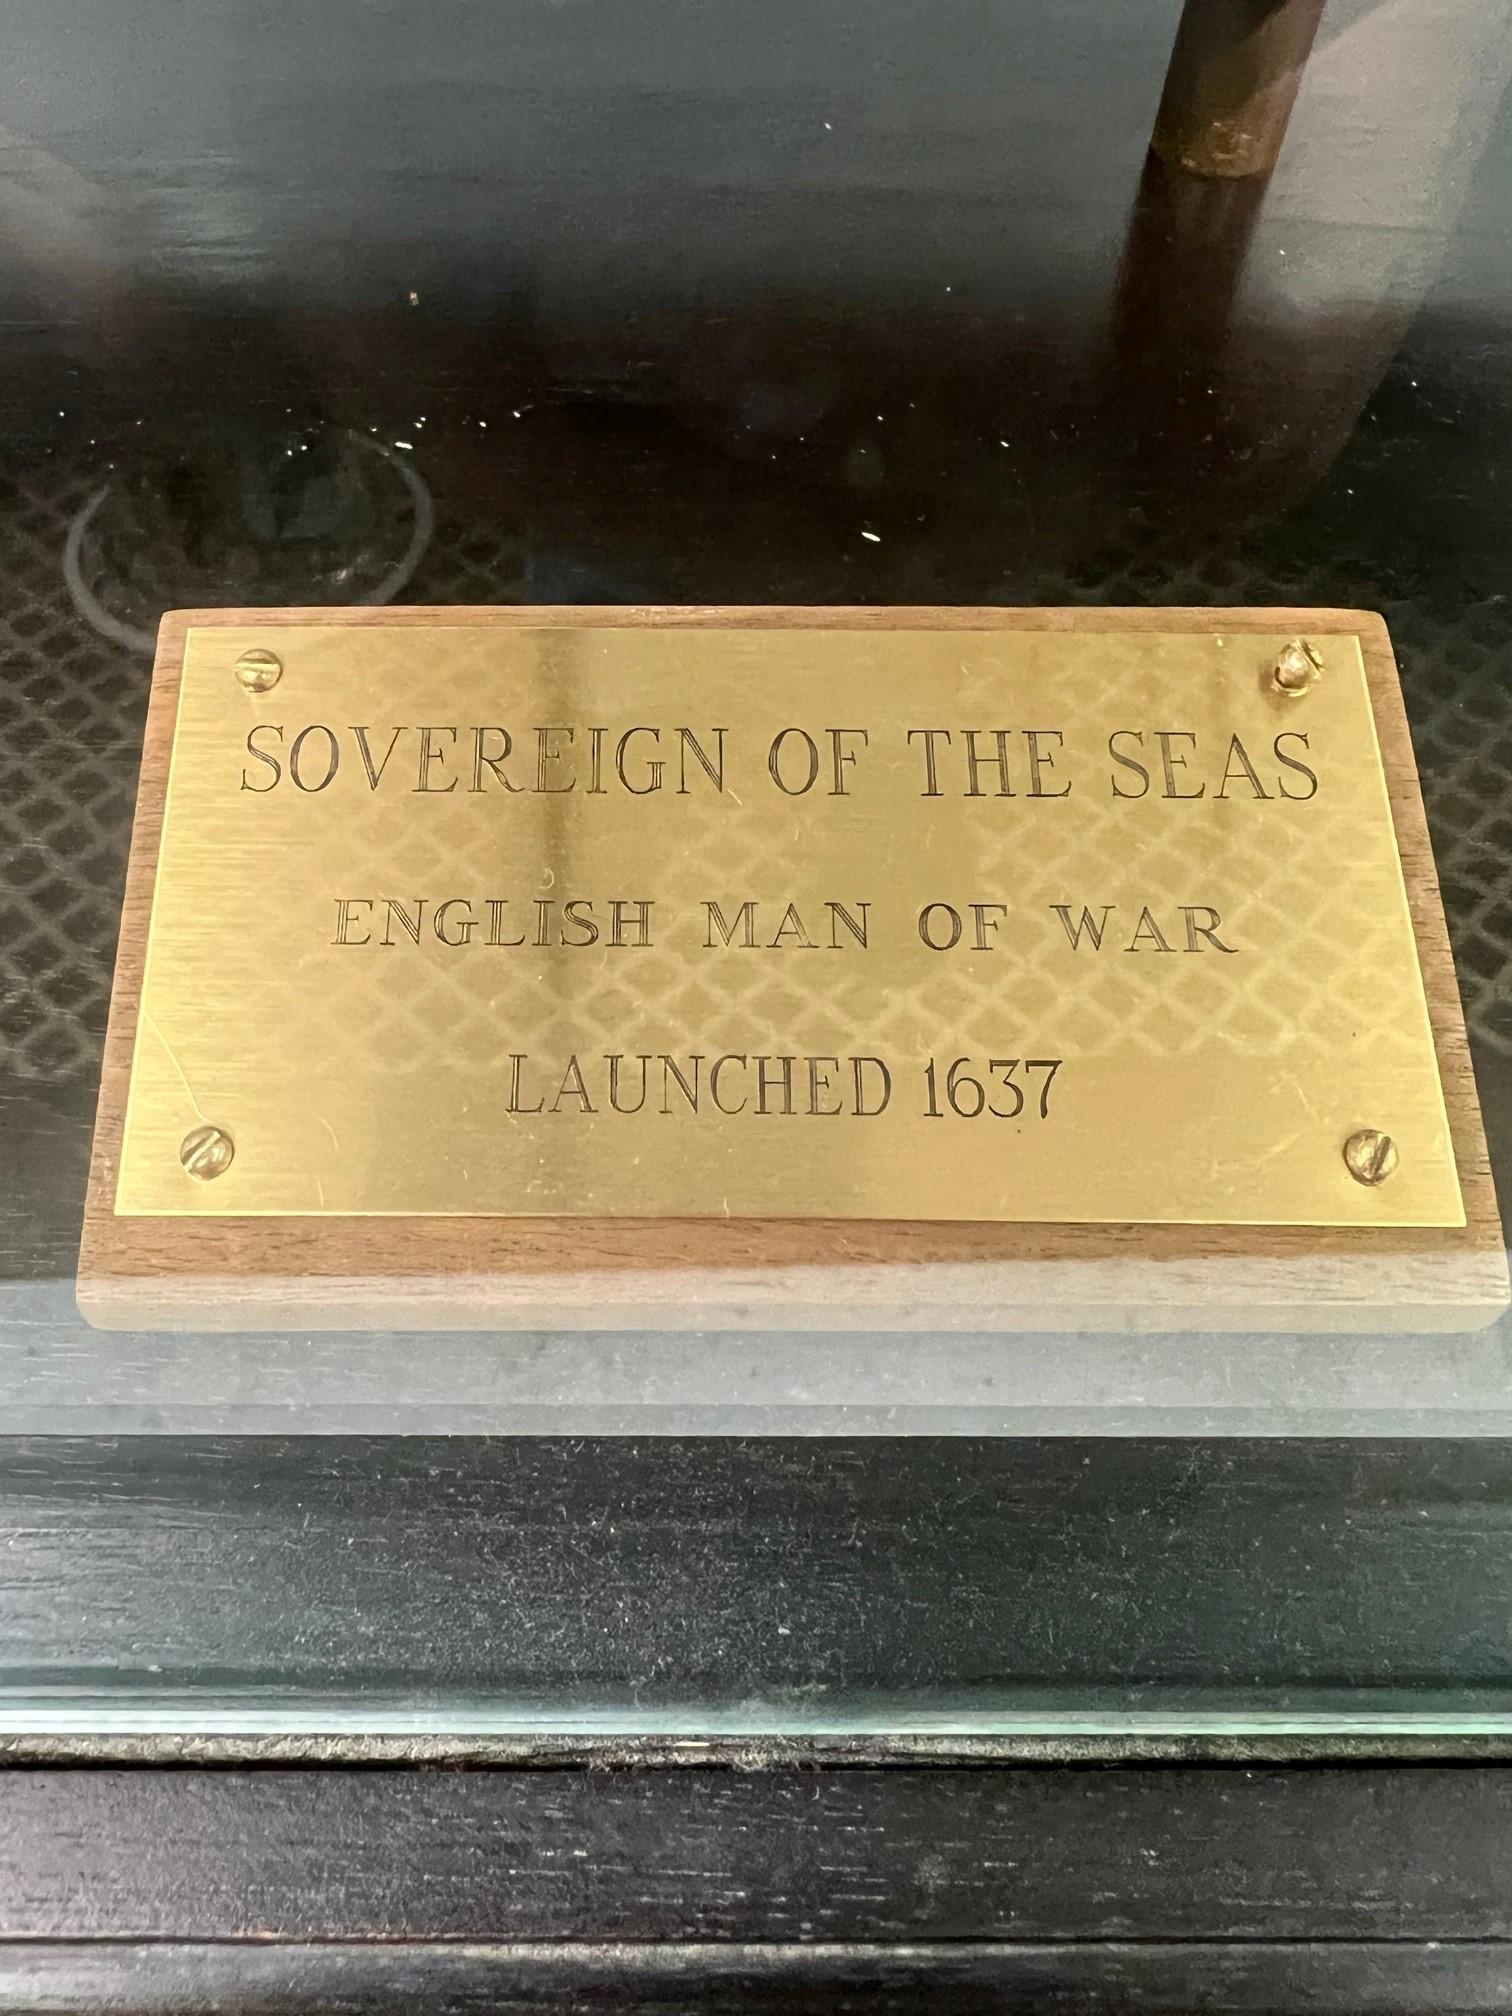 The Sovereign of the Seas, an early British 